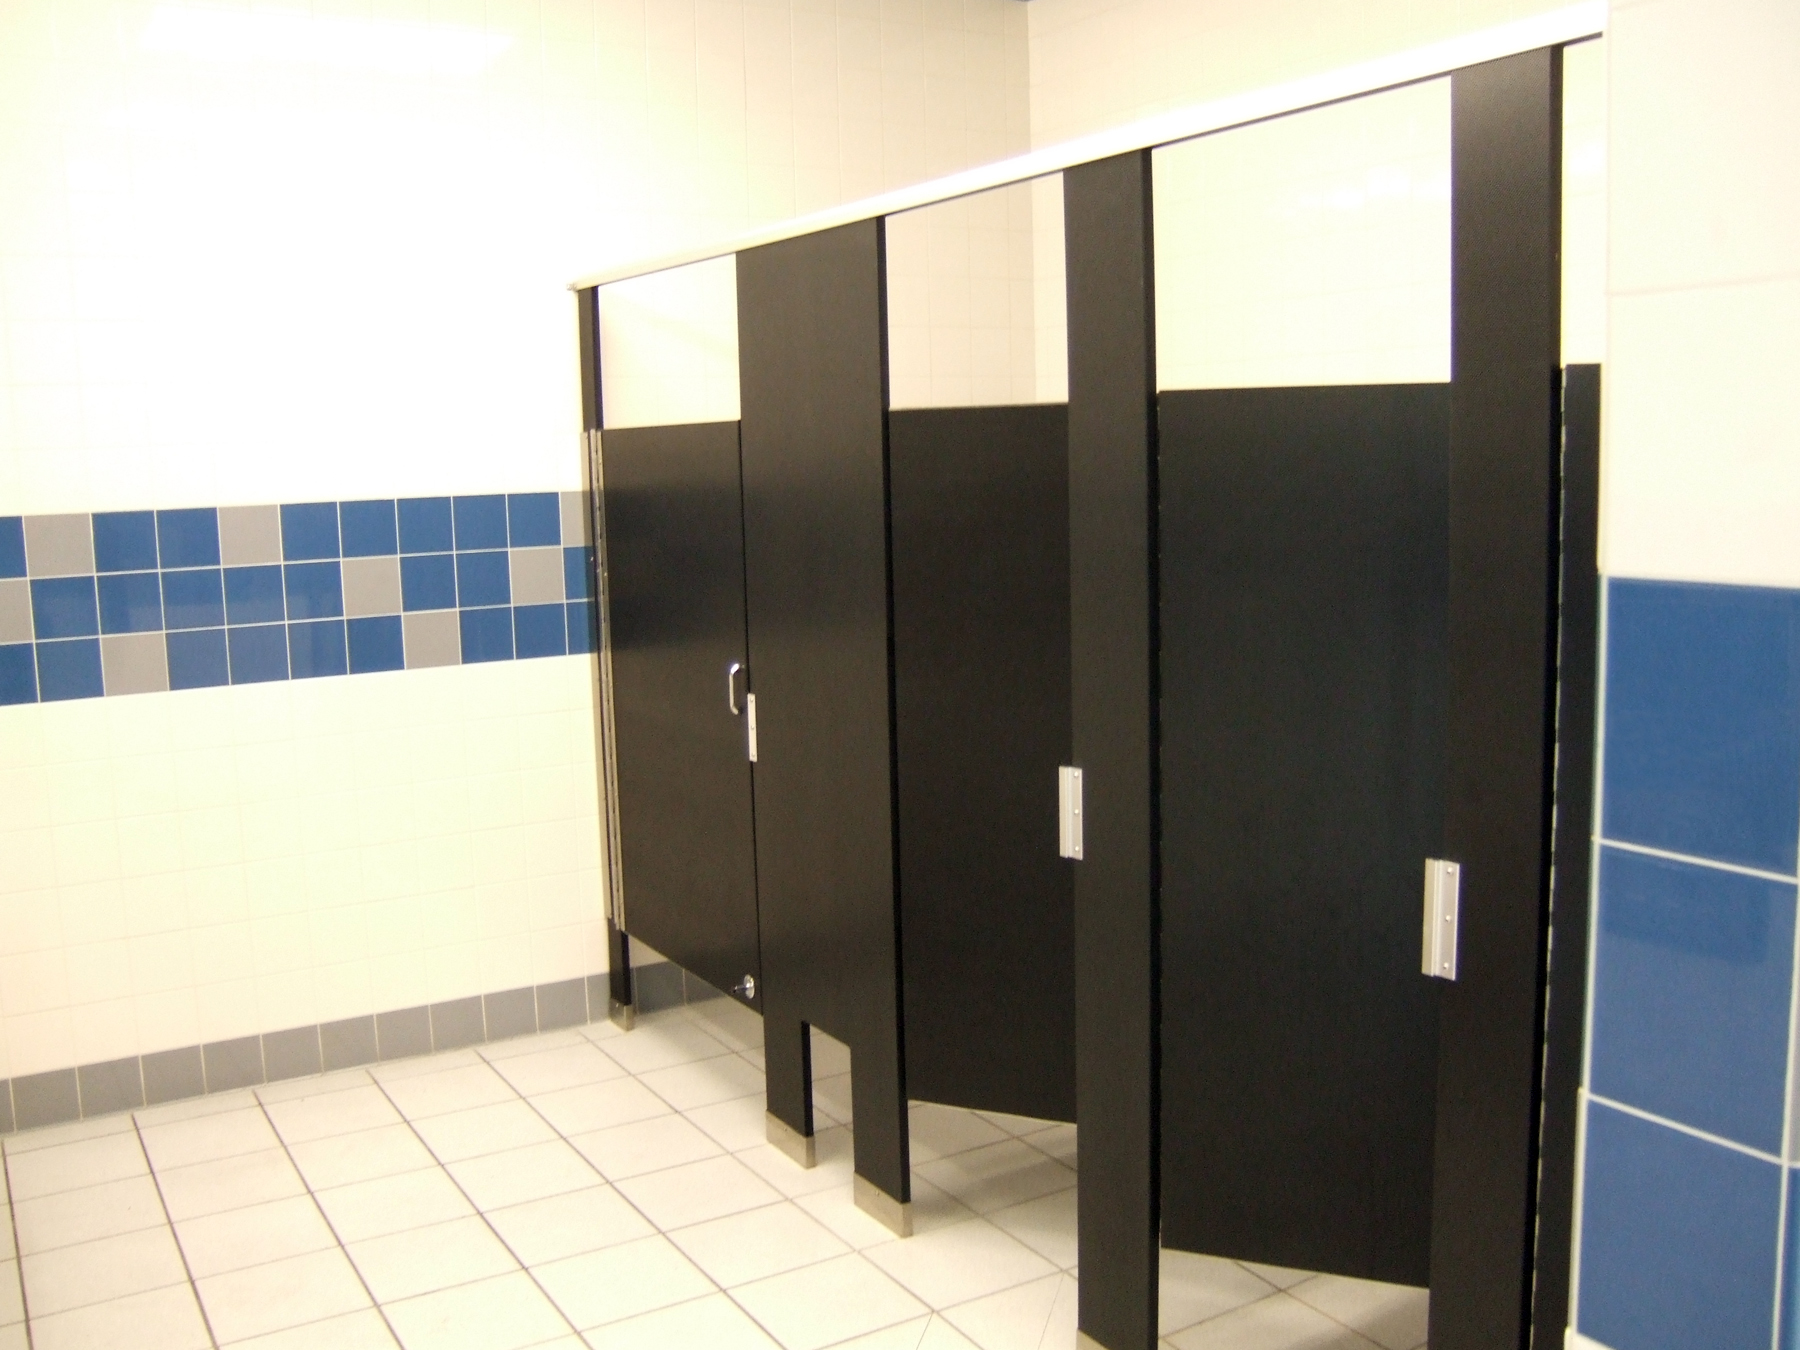 School Restroom Stalls With Bathroom Partitions